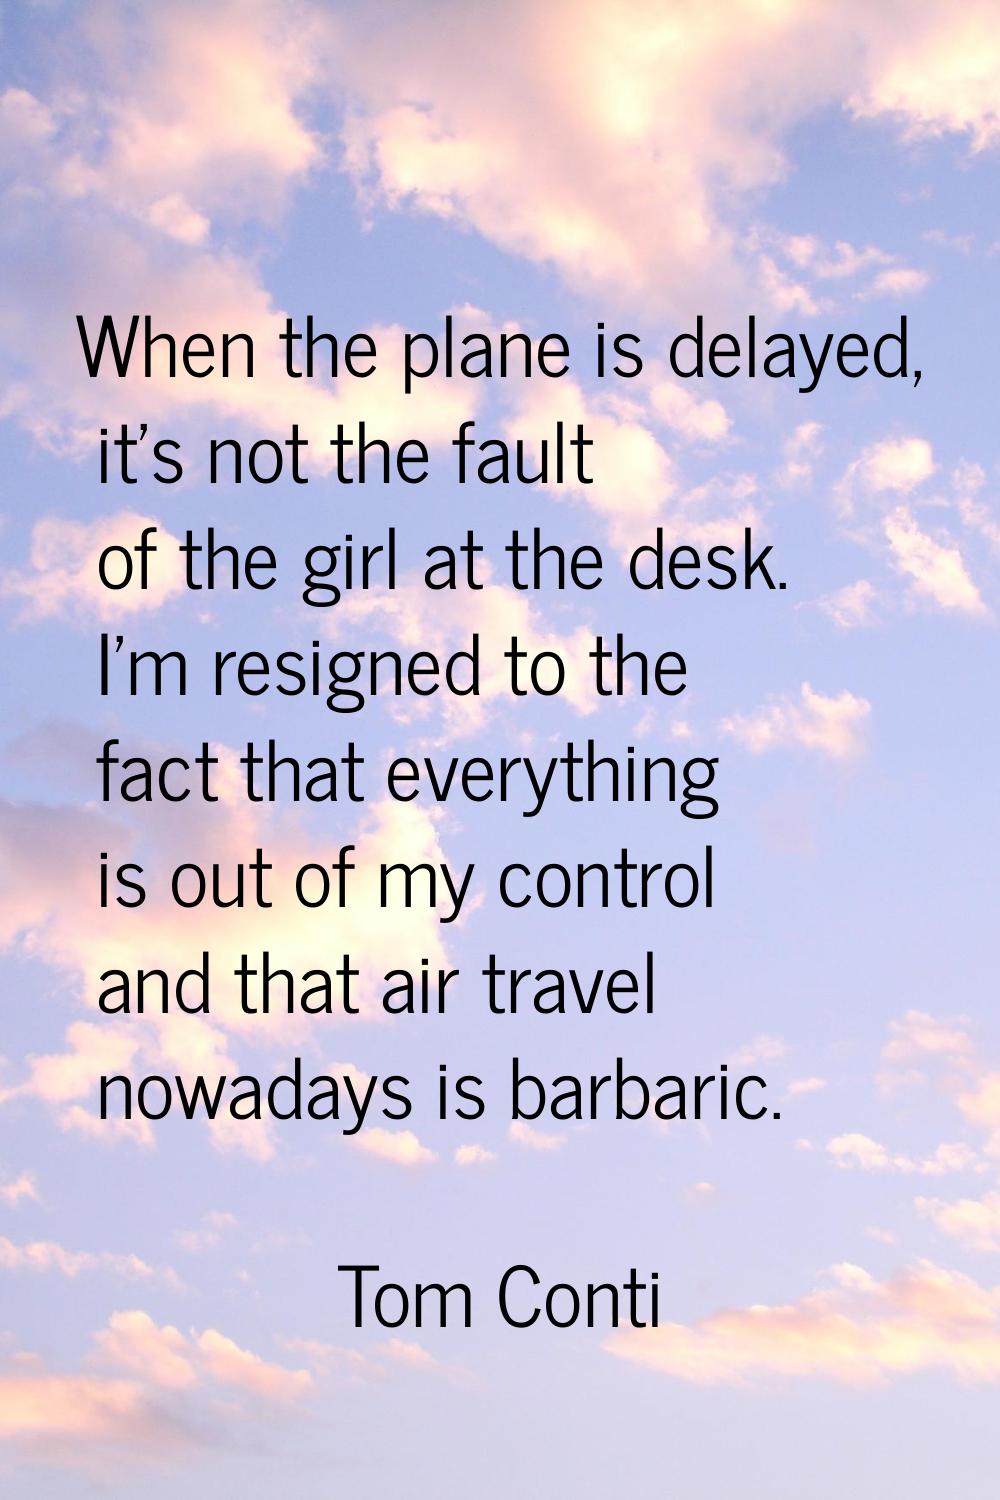 When the plane is delayed, it's not the fault of the girl at the desk. I'm resigned to the fact tha